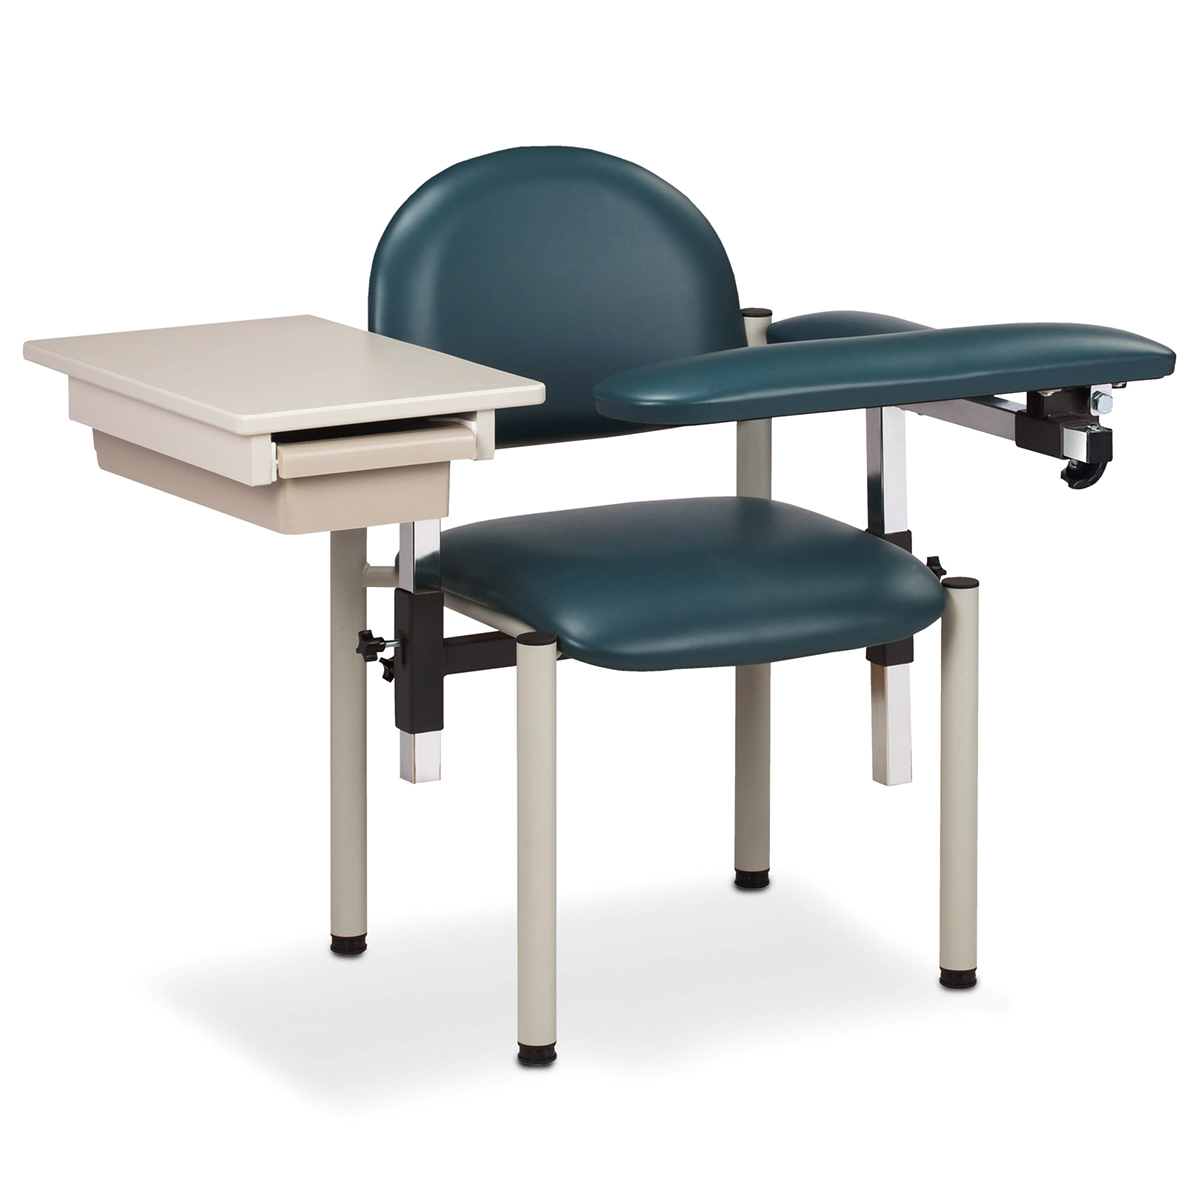 Medical Blood Draw Chairs